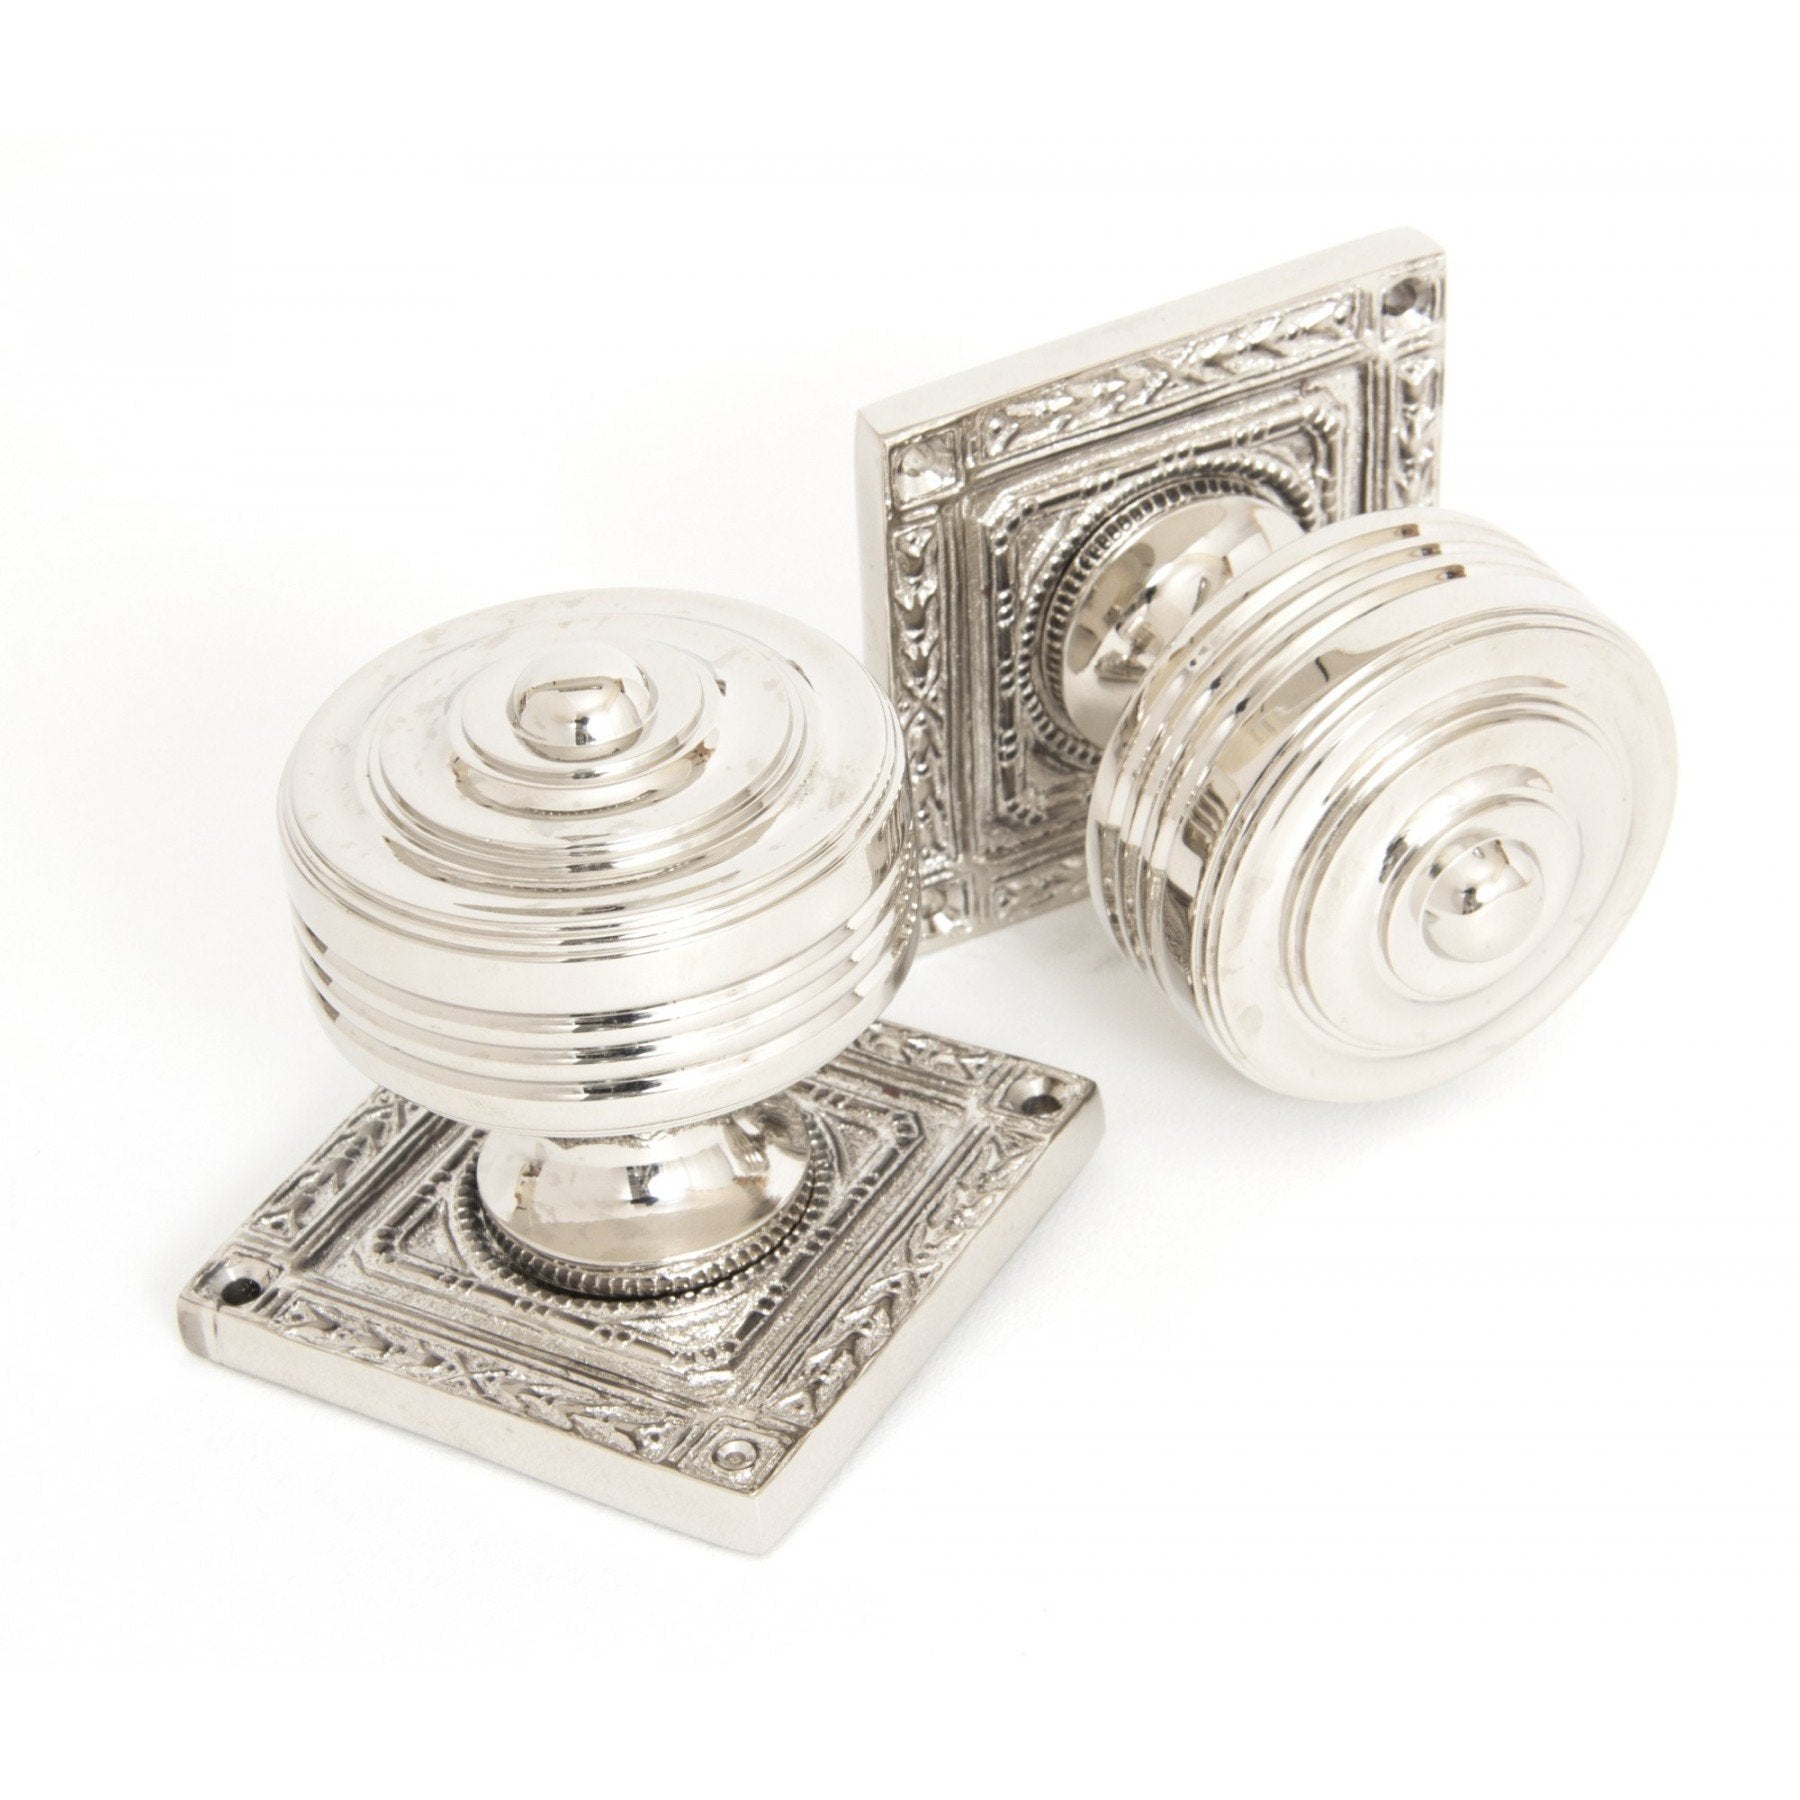 From the Anvil Polished Nickel Tewkesbury Square Mortice Knob Set - No.42 Interiors